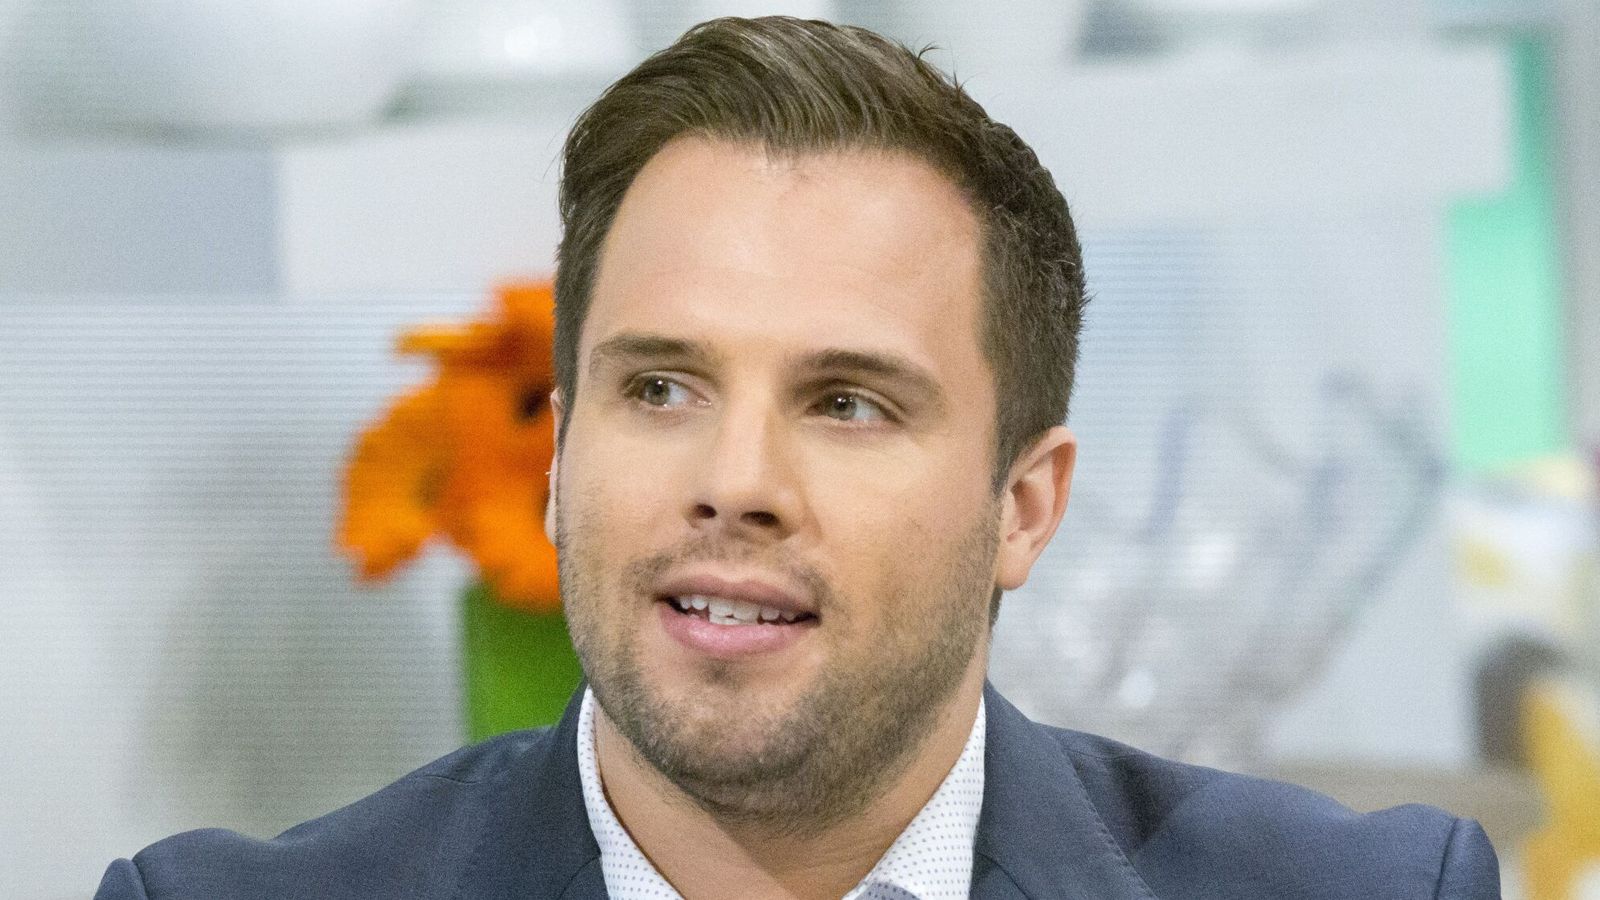 Dan Wootton Leaves Gb News To Launch His Own Independent Platform Ents And Arts News Sky News